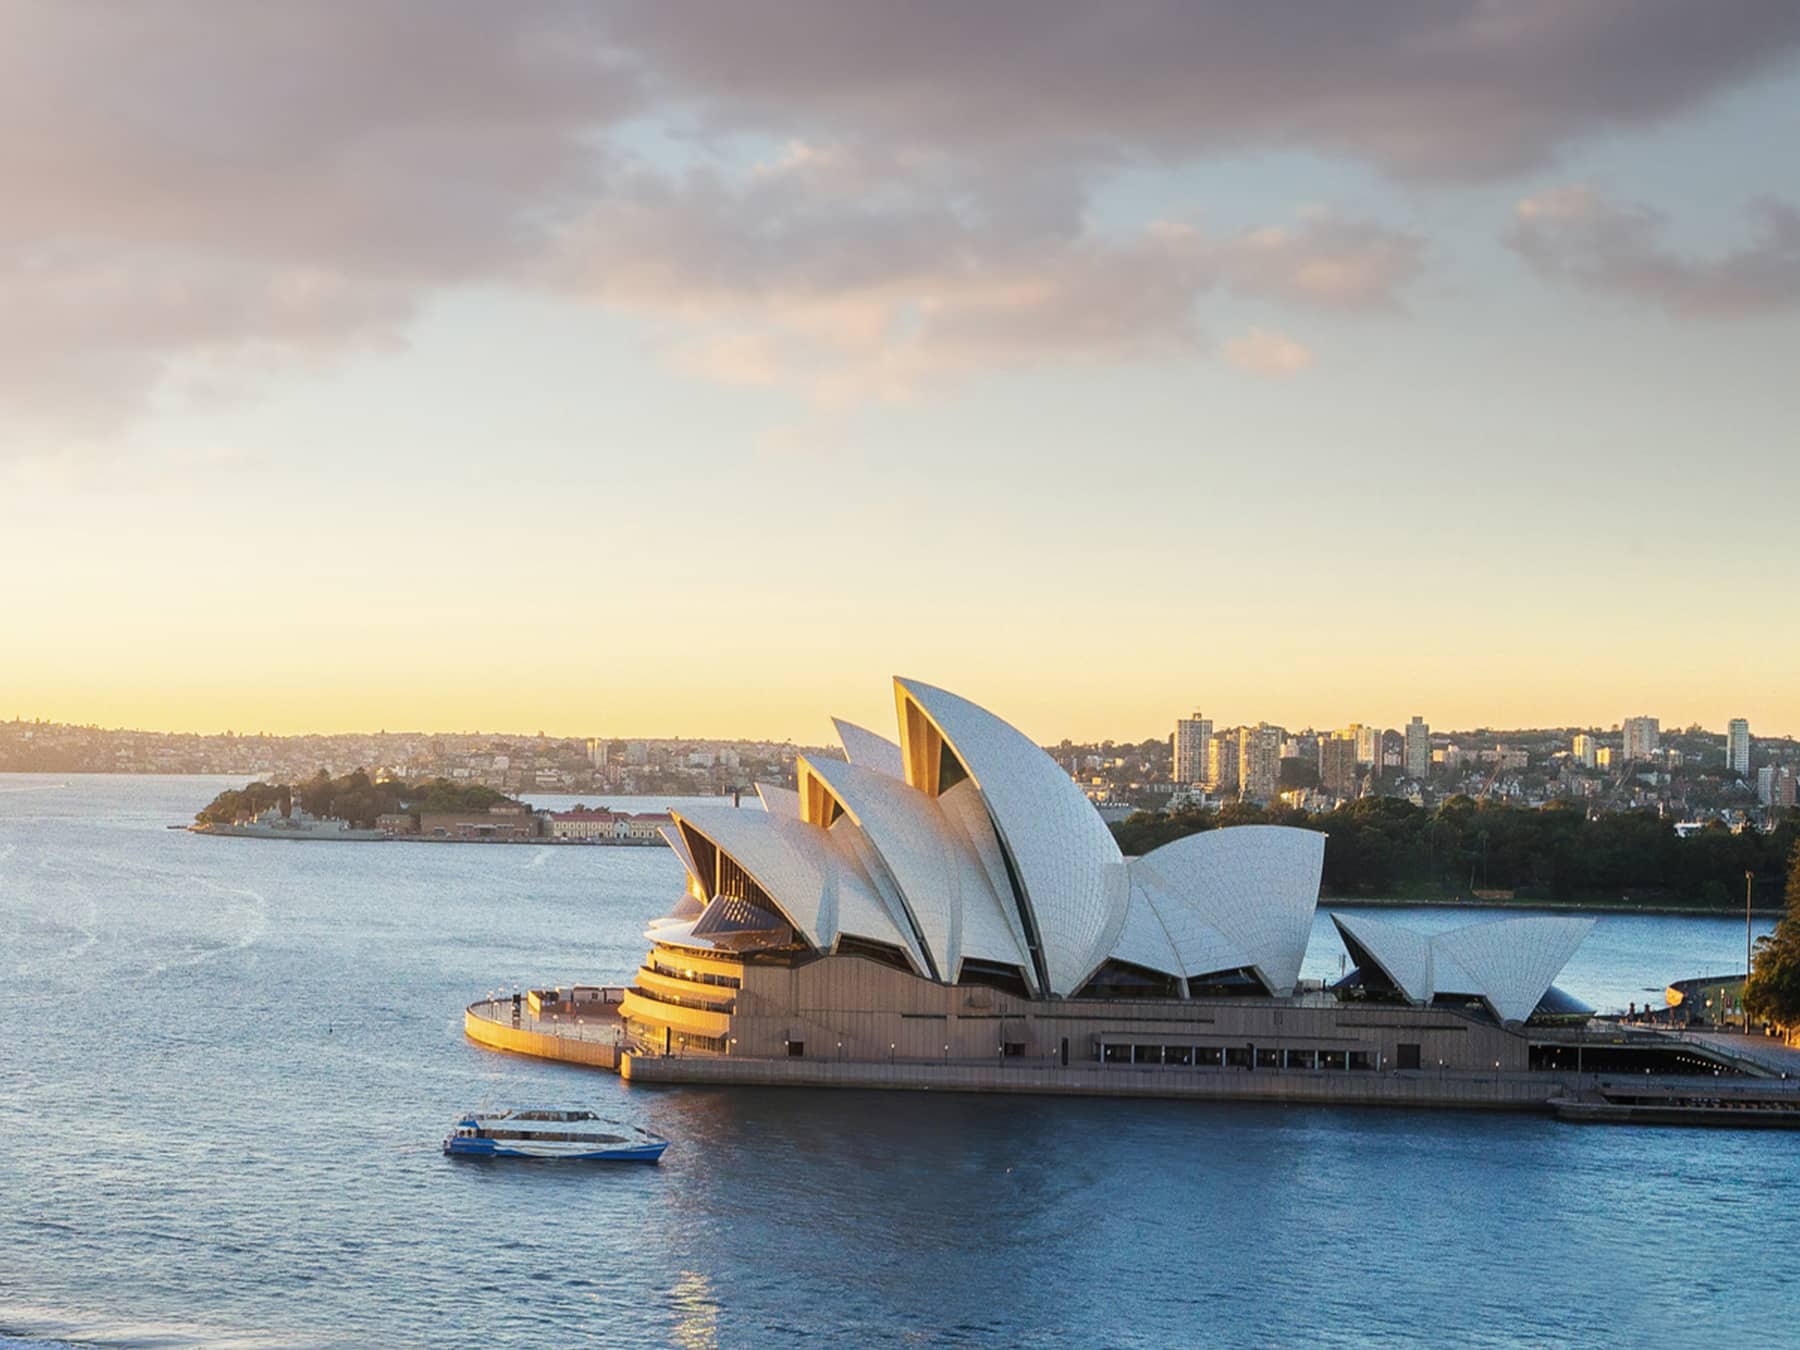  Go behind the scenes at Sydney’s Opera House  